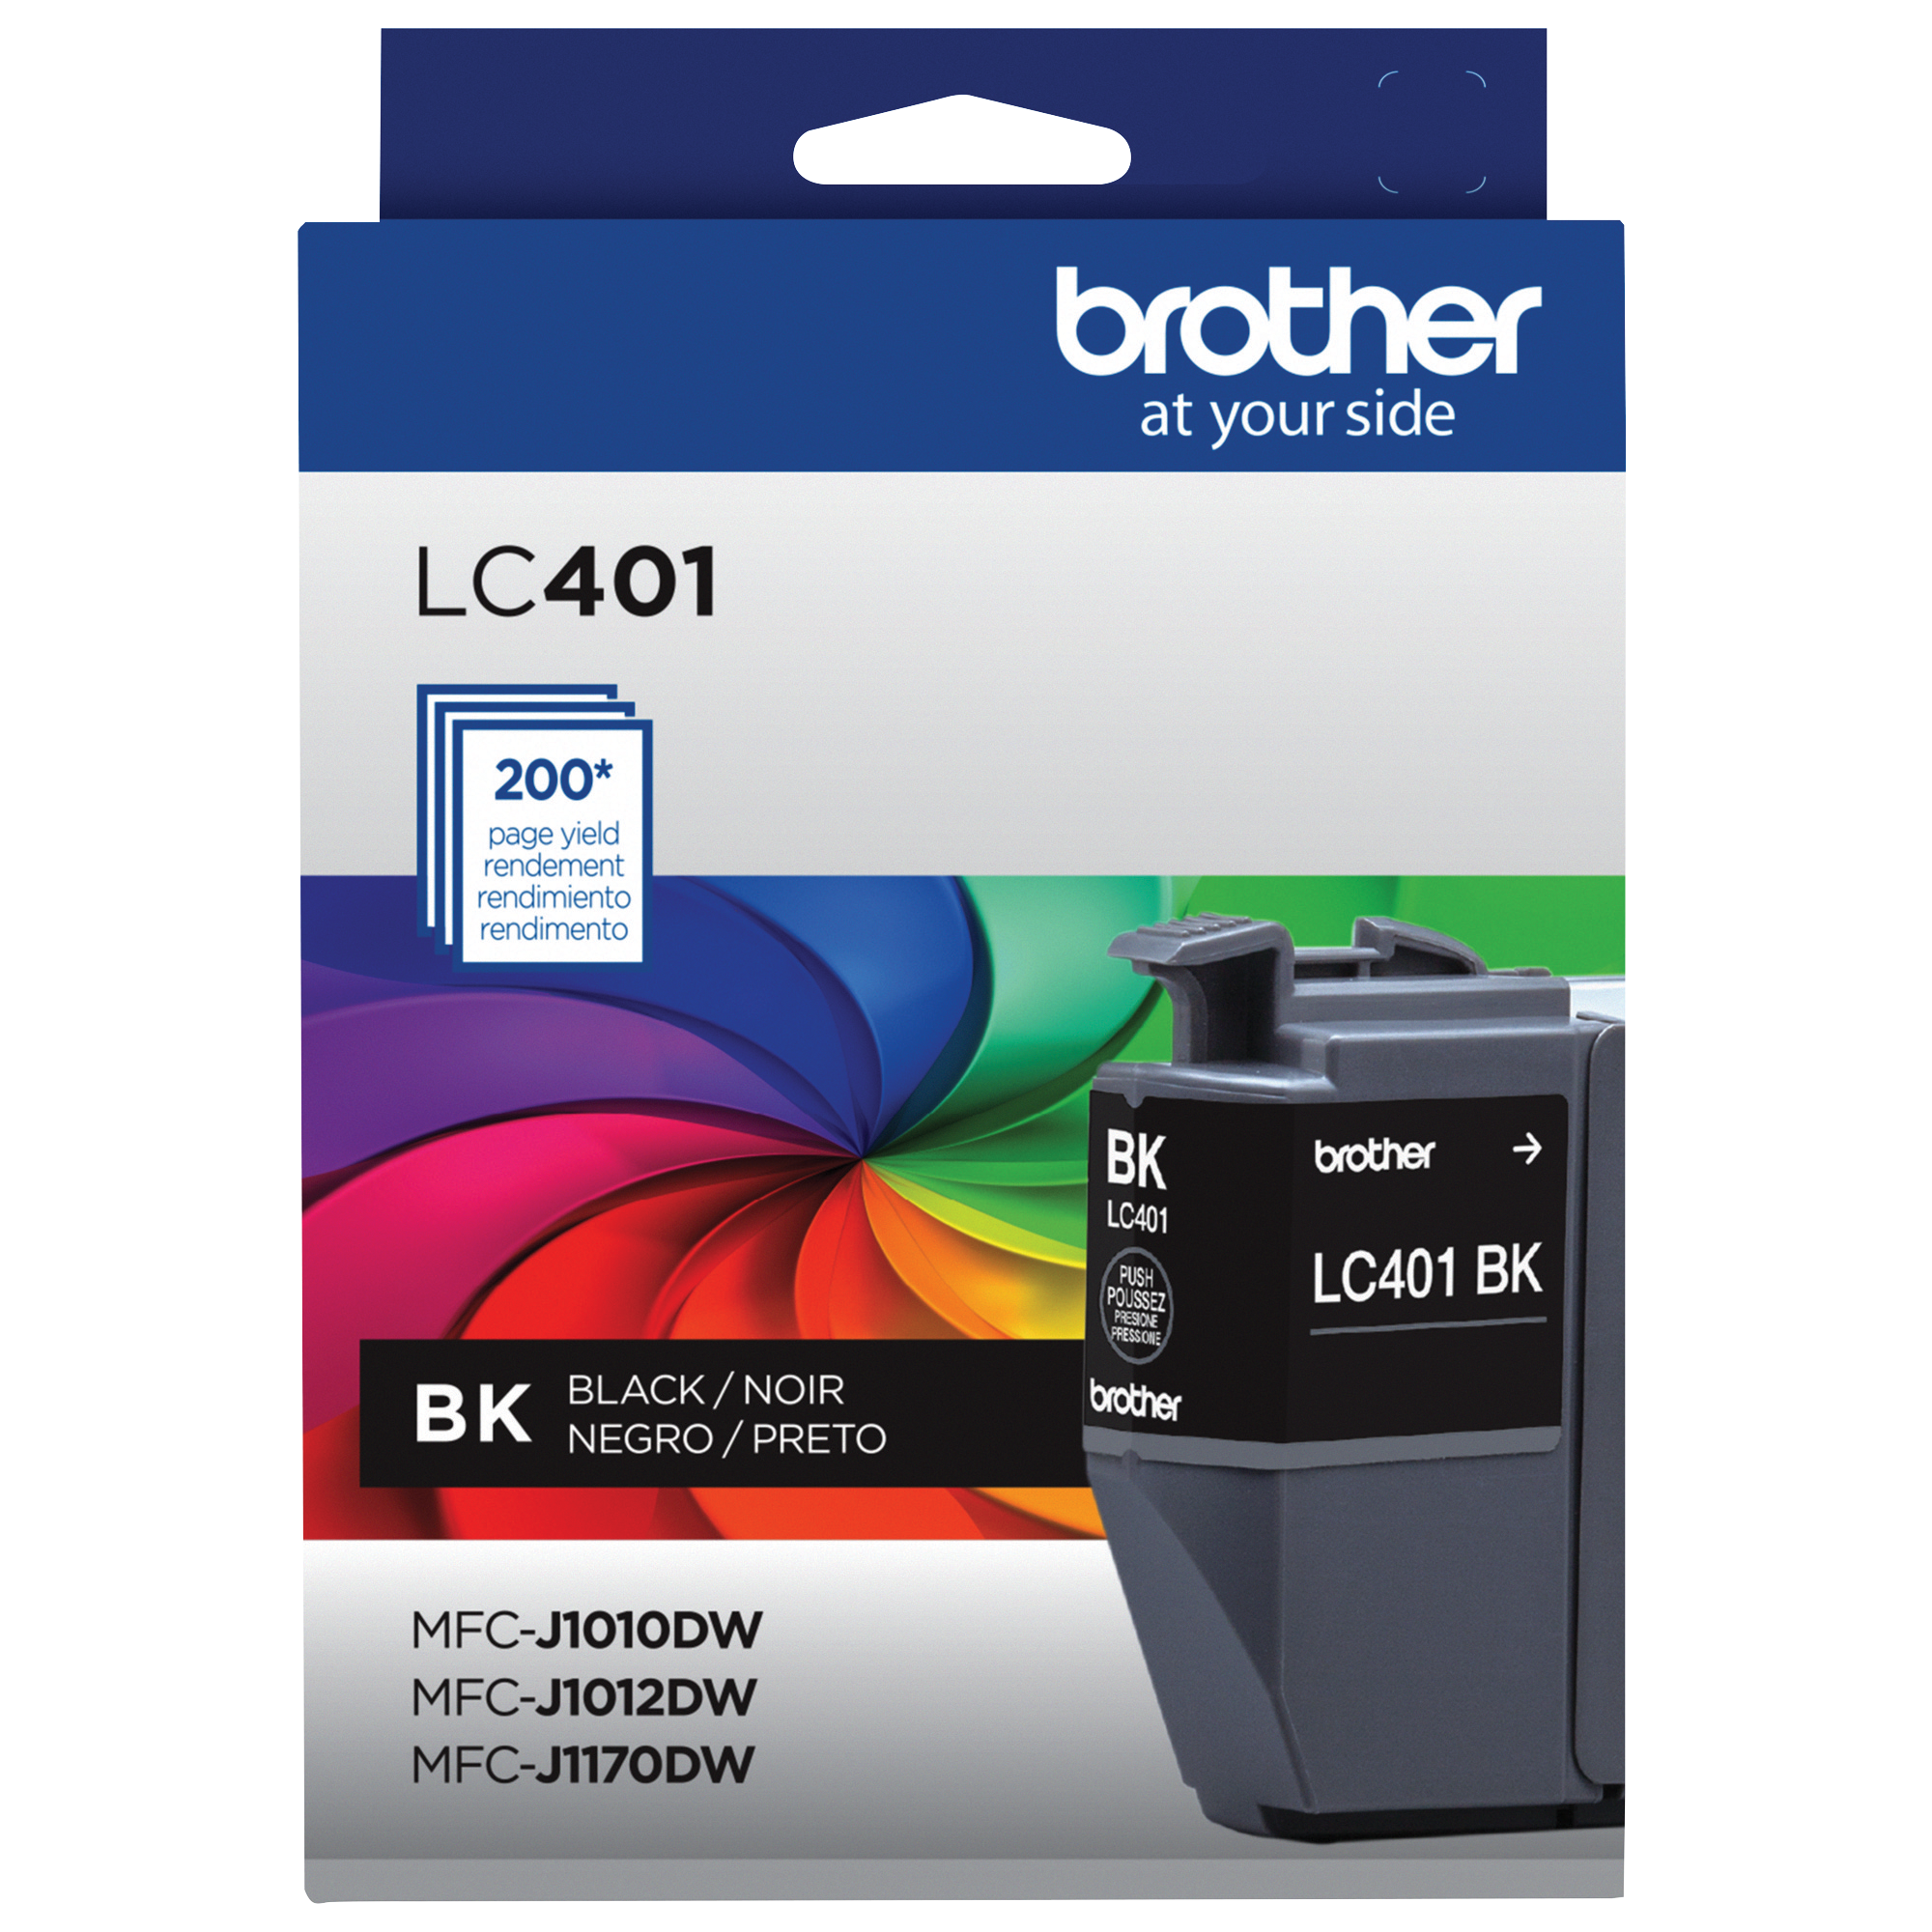 An In-depth Look at Brother Toner Cartridges: All You Need to Know